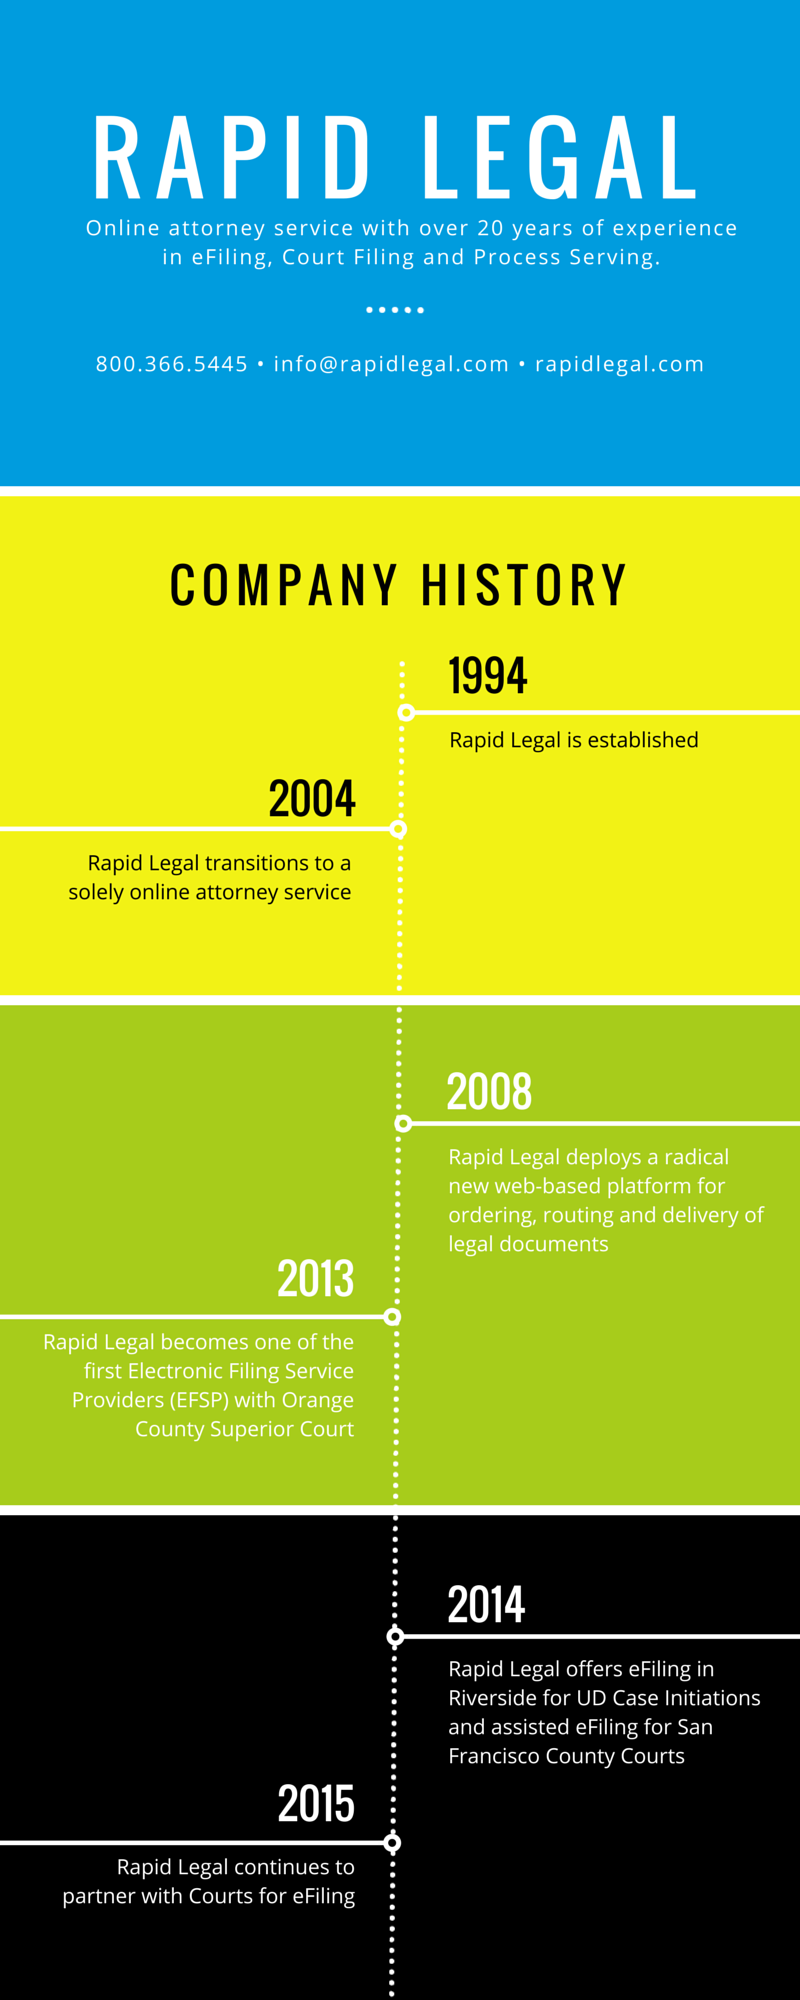 Rapid Legals history online attorney services